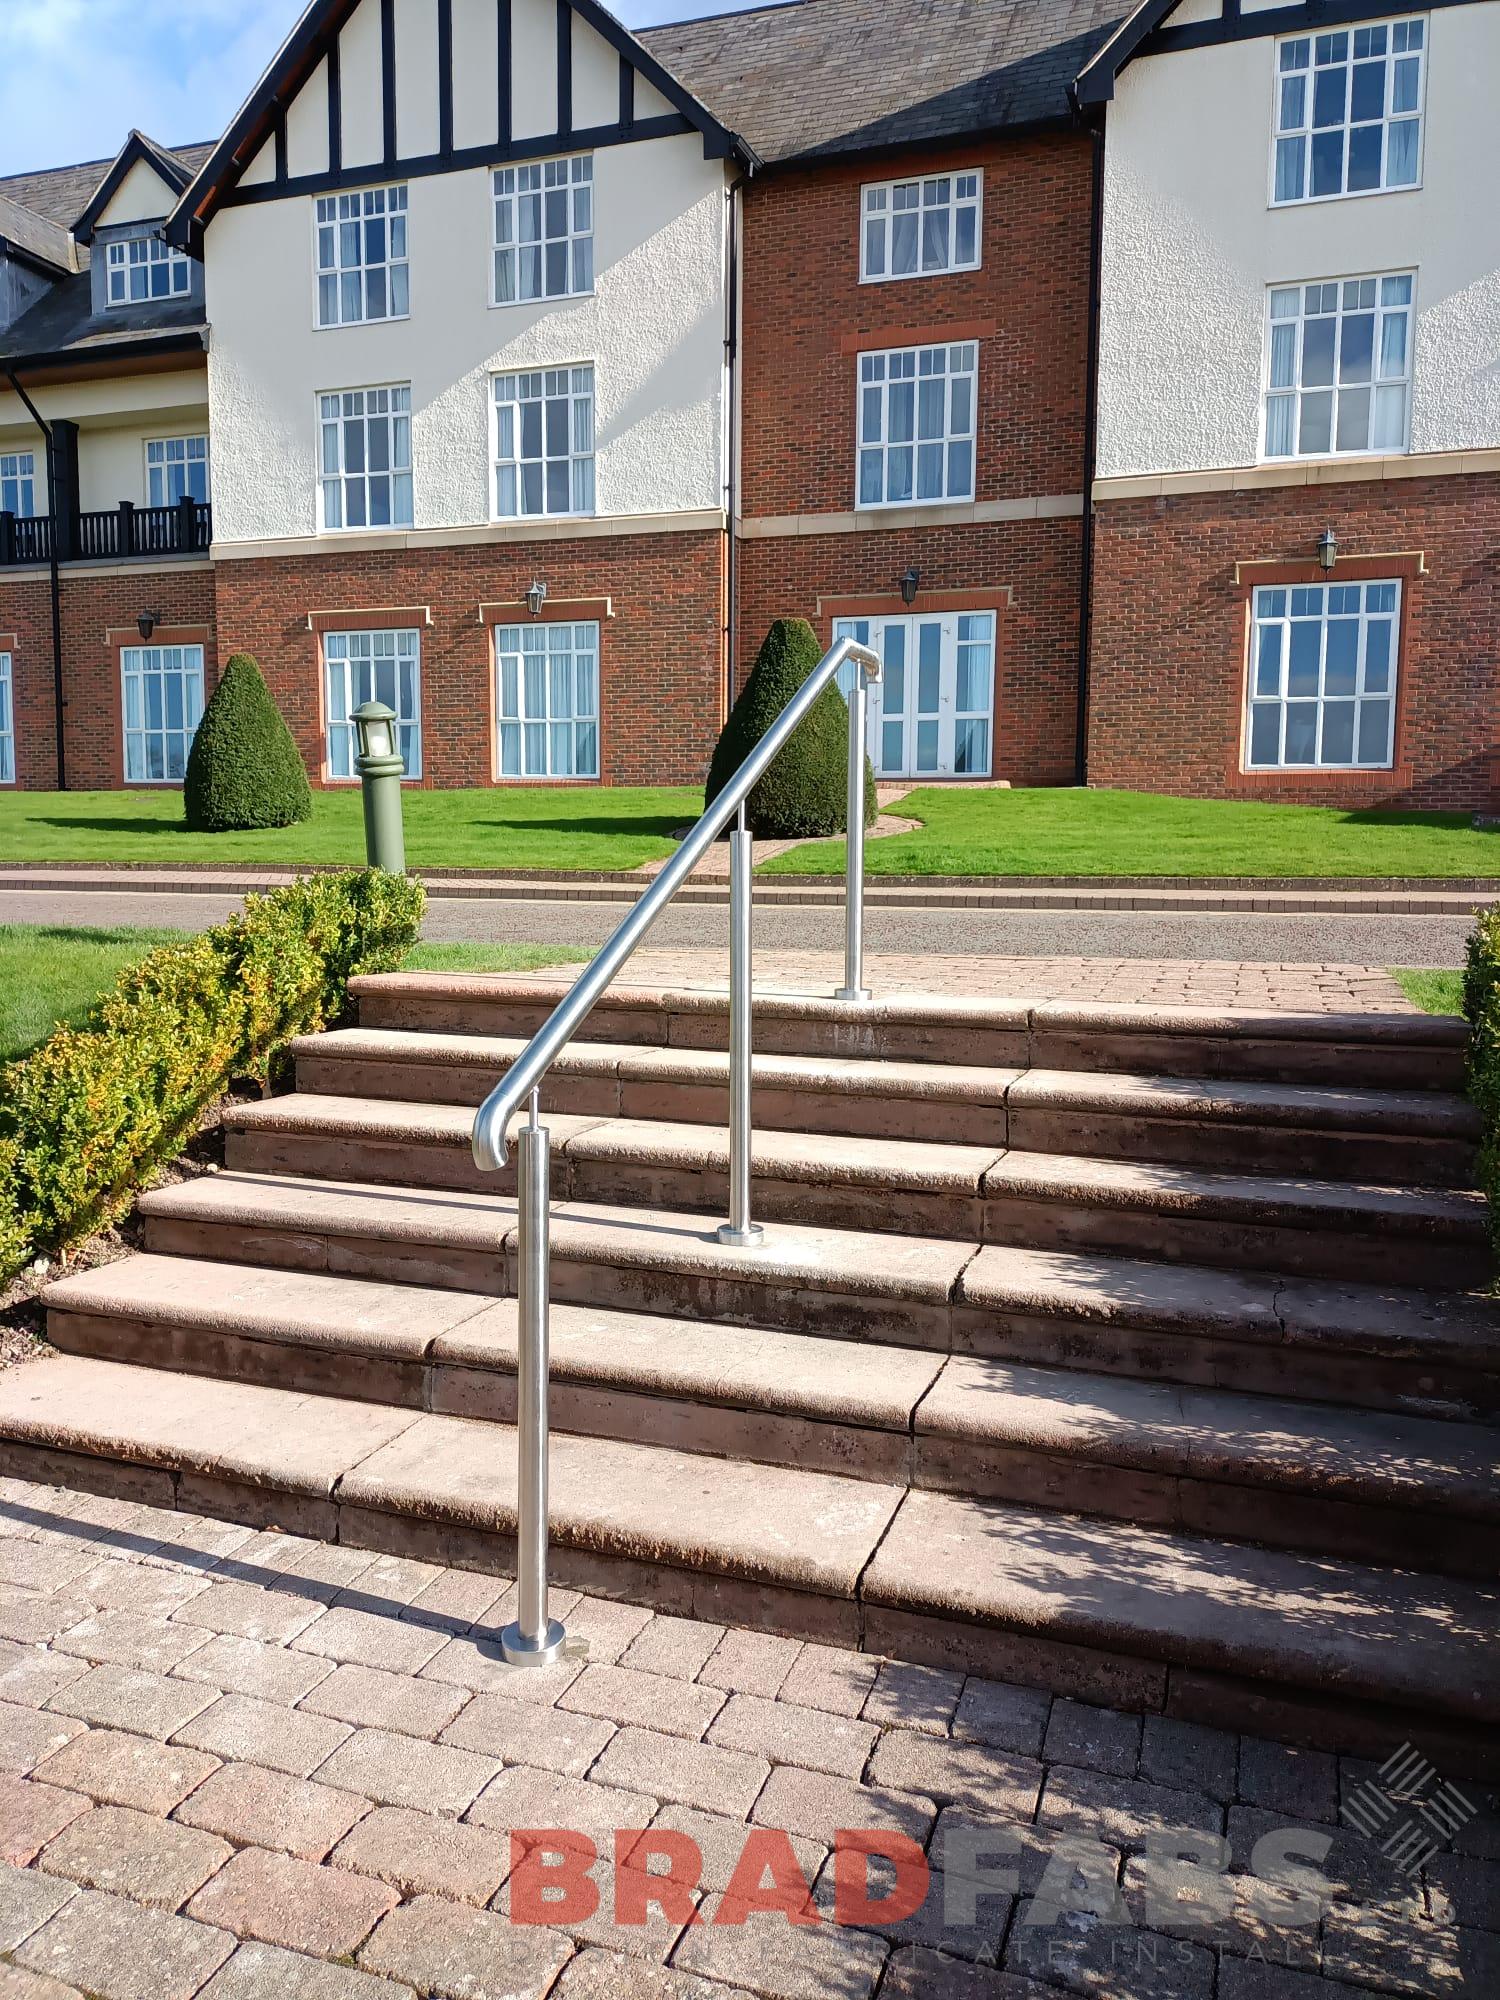 Bradfabs, stainless steel railing, commercial property railing, balustrade, steelwork